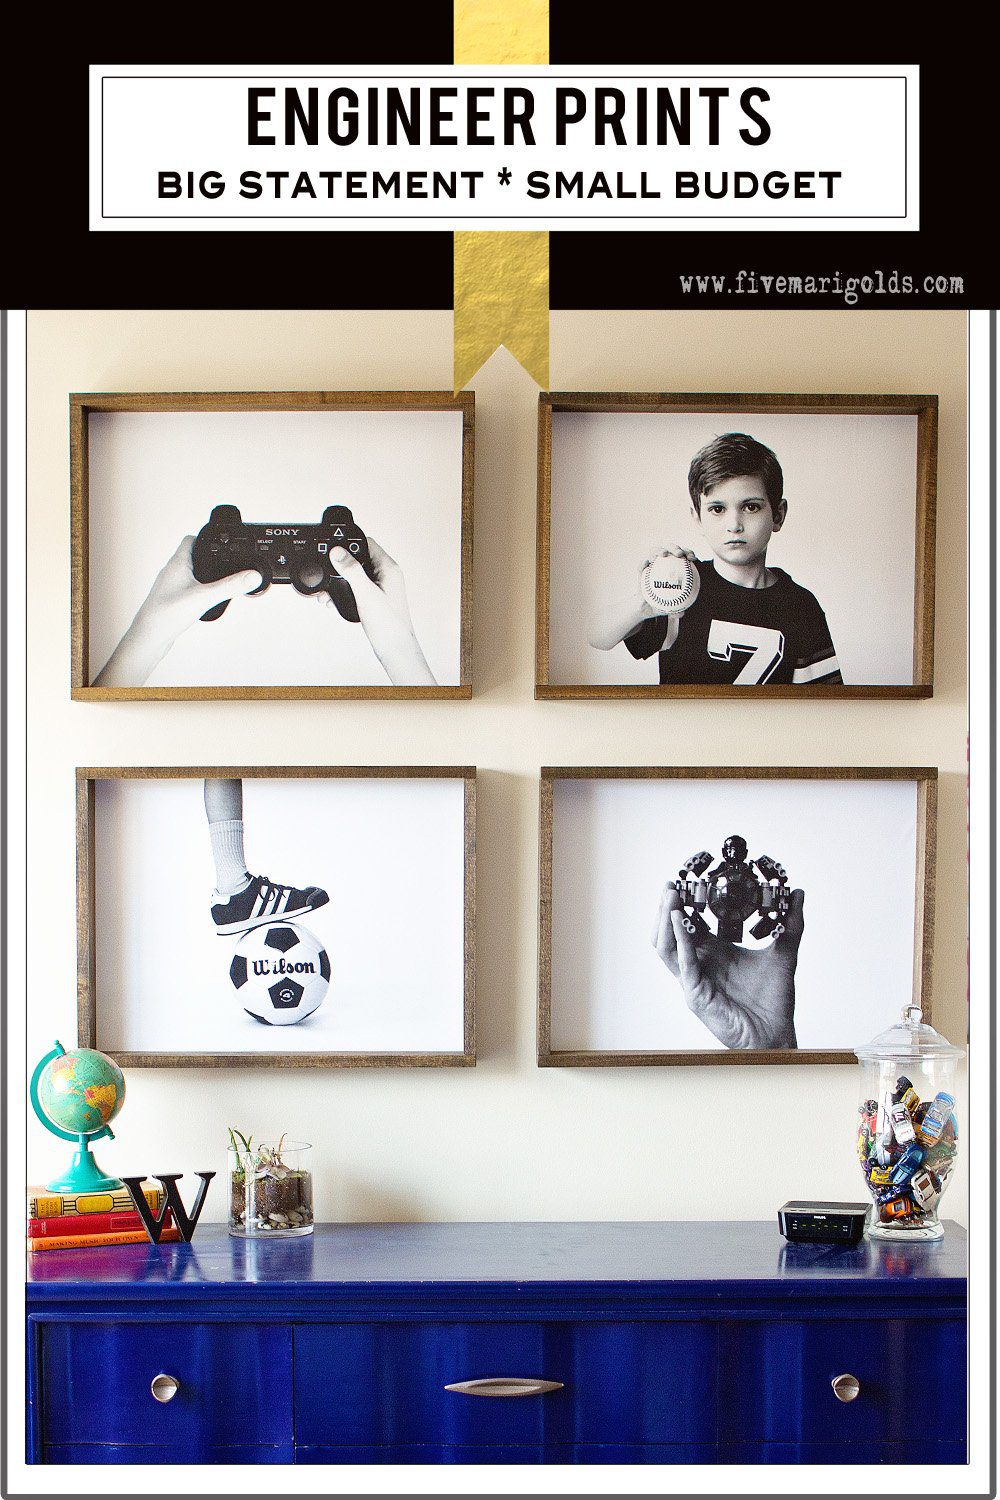 Engineer prints make a big statement on a small budget. Love these for a boy's room!